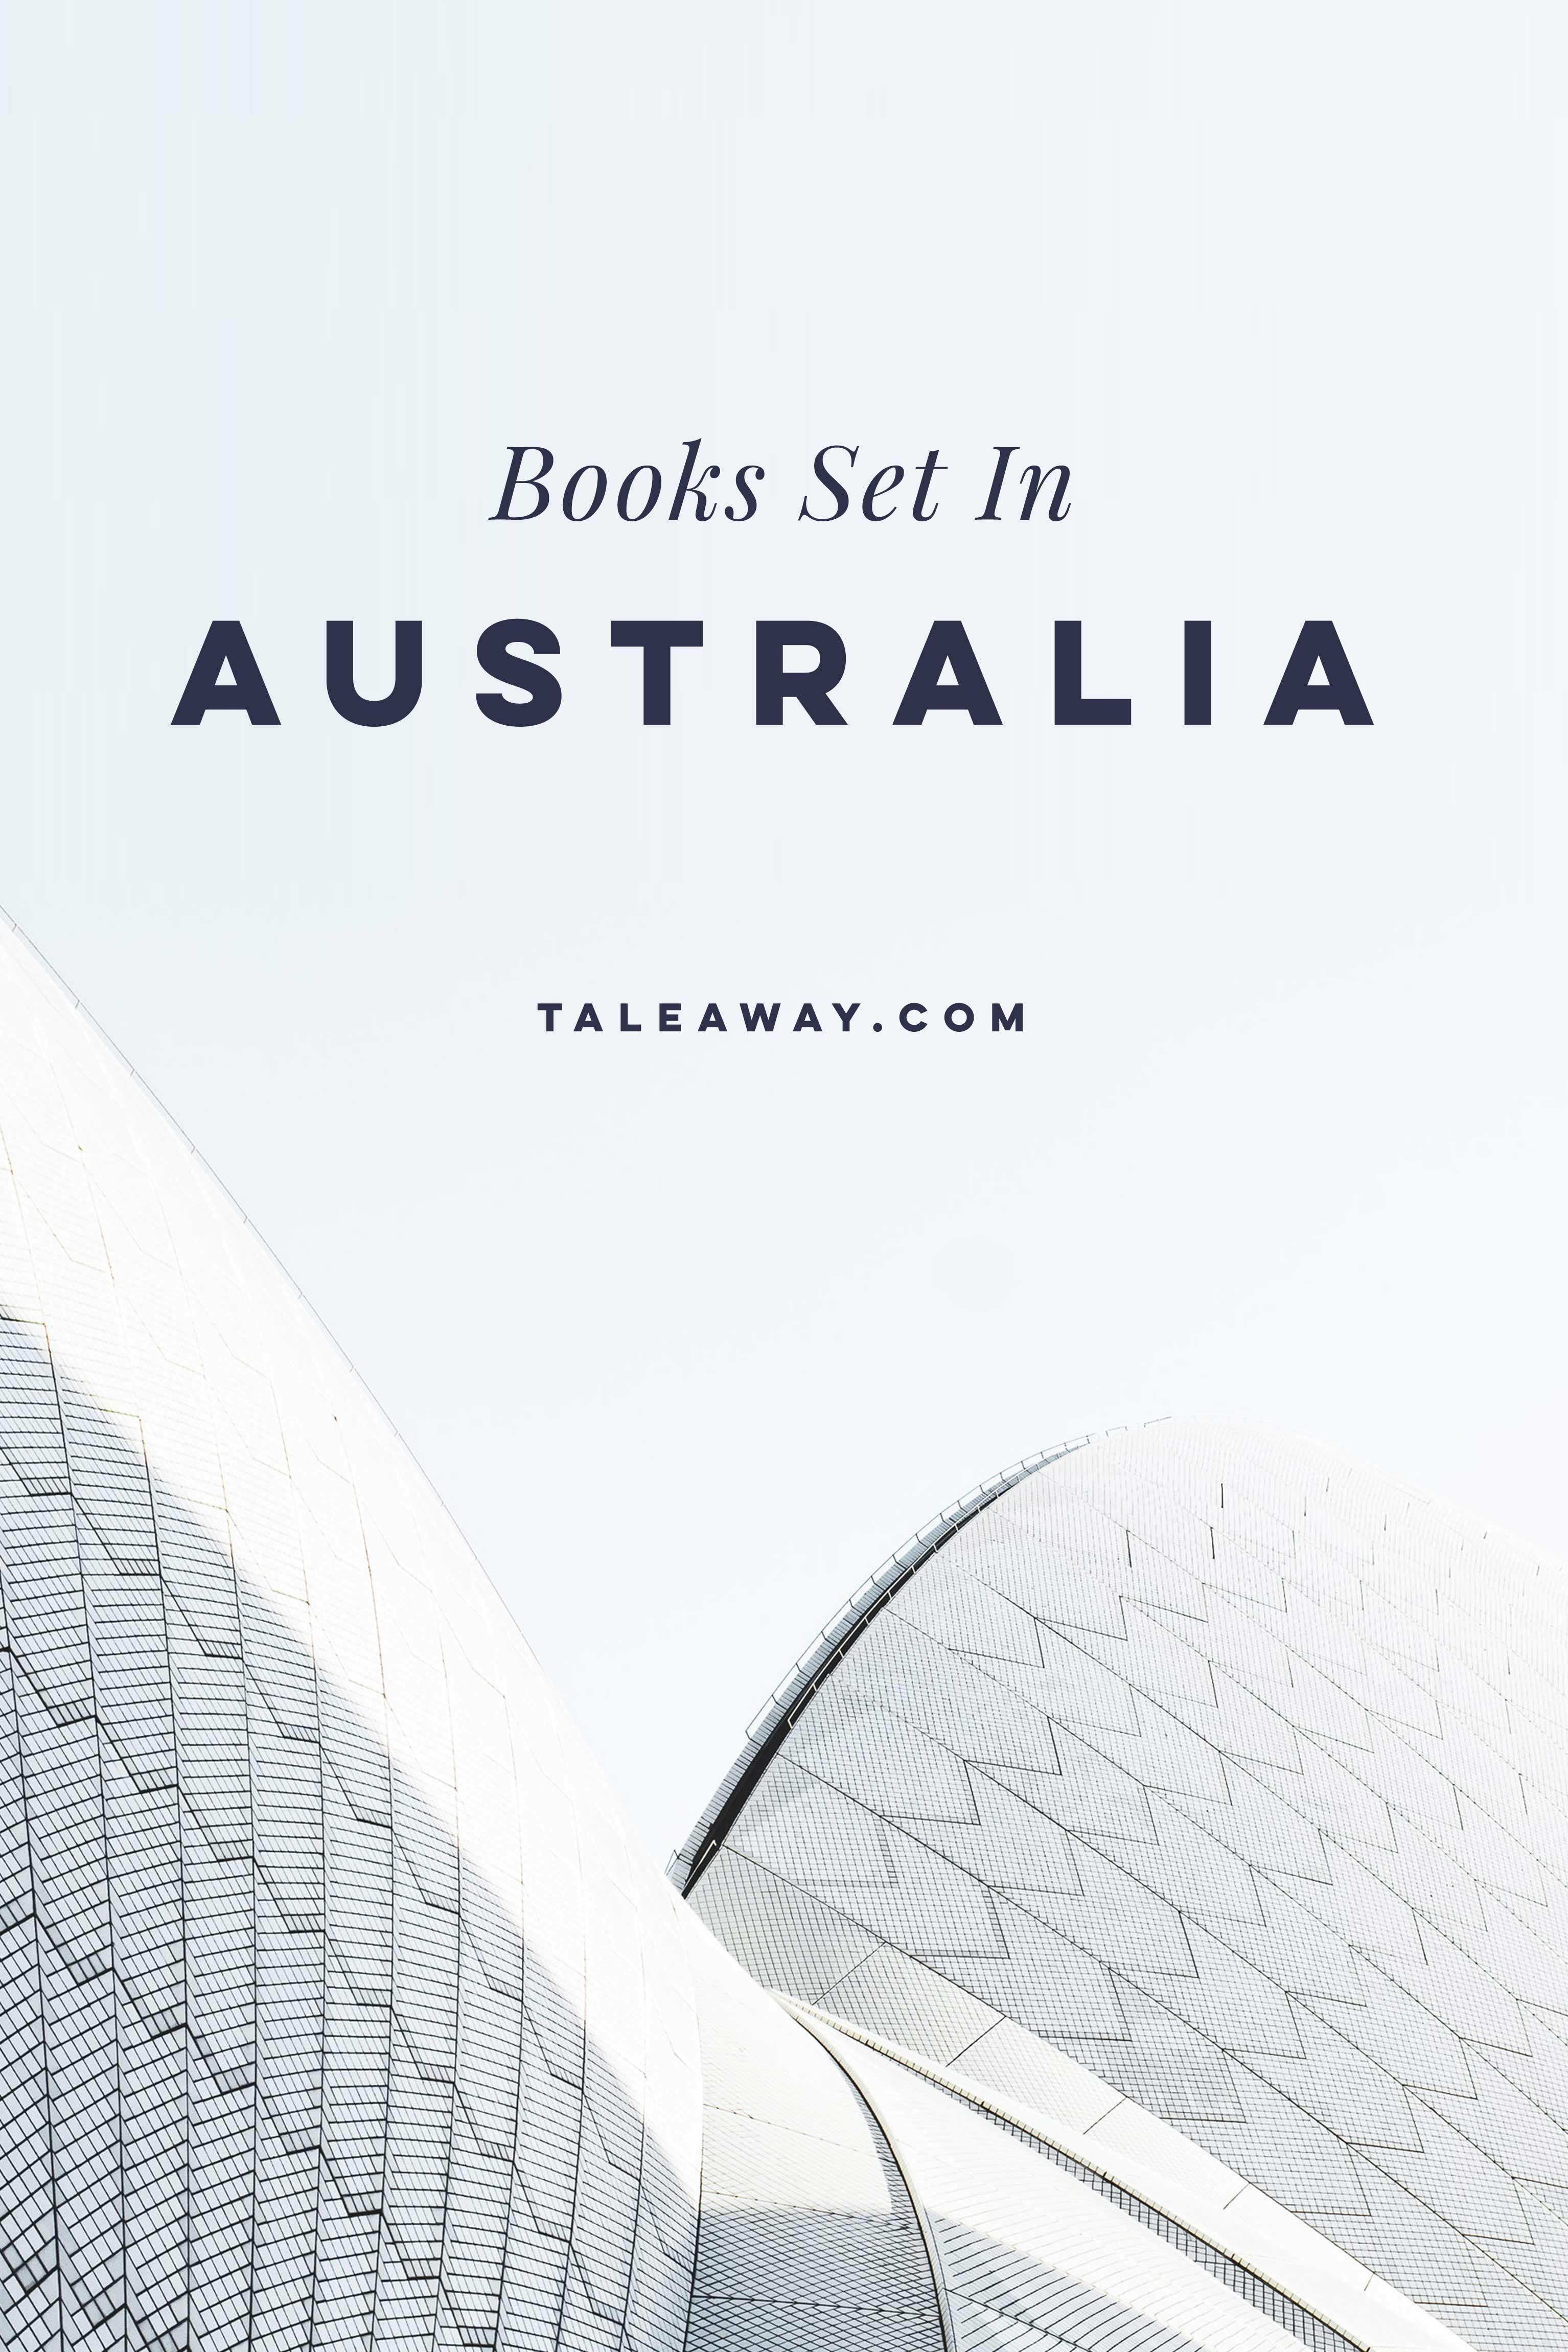 Books Set In Australia - For more books visit www.taleway.com to find books set around the world. Ideas for those who like to travel, both in life and in fiction. australian books, books and travel, travel reads, reading list, books around the world, books to read, books set in different countries, australia